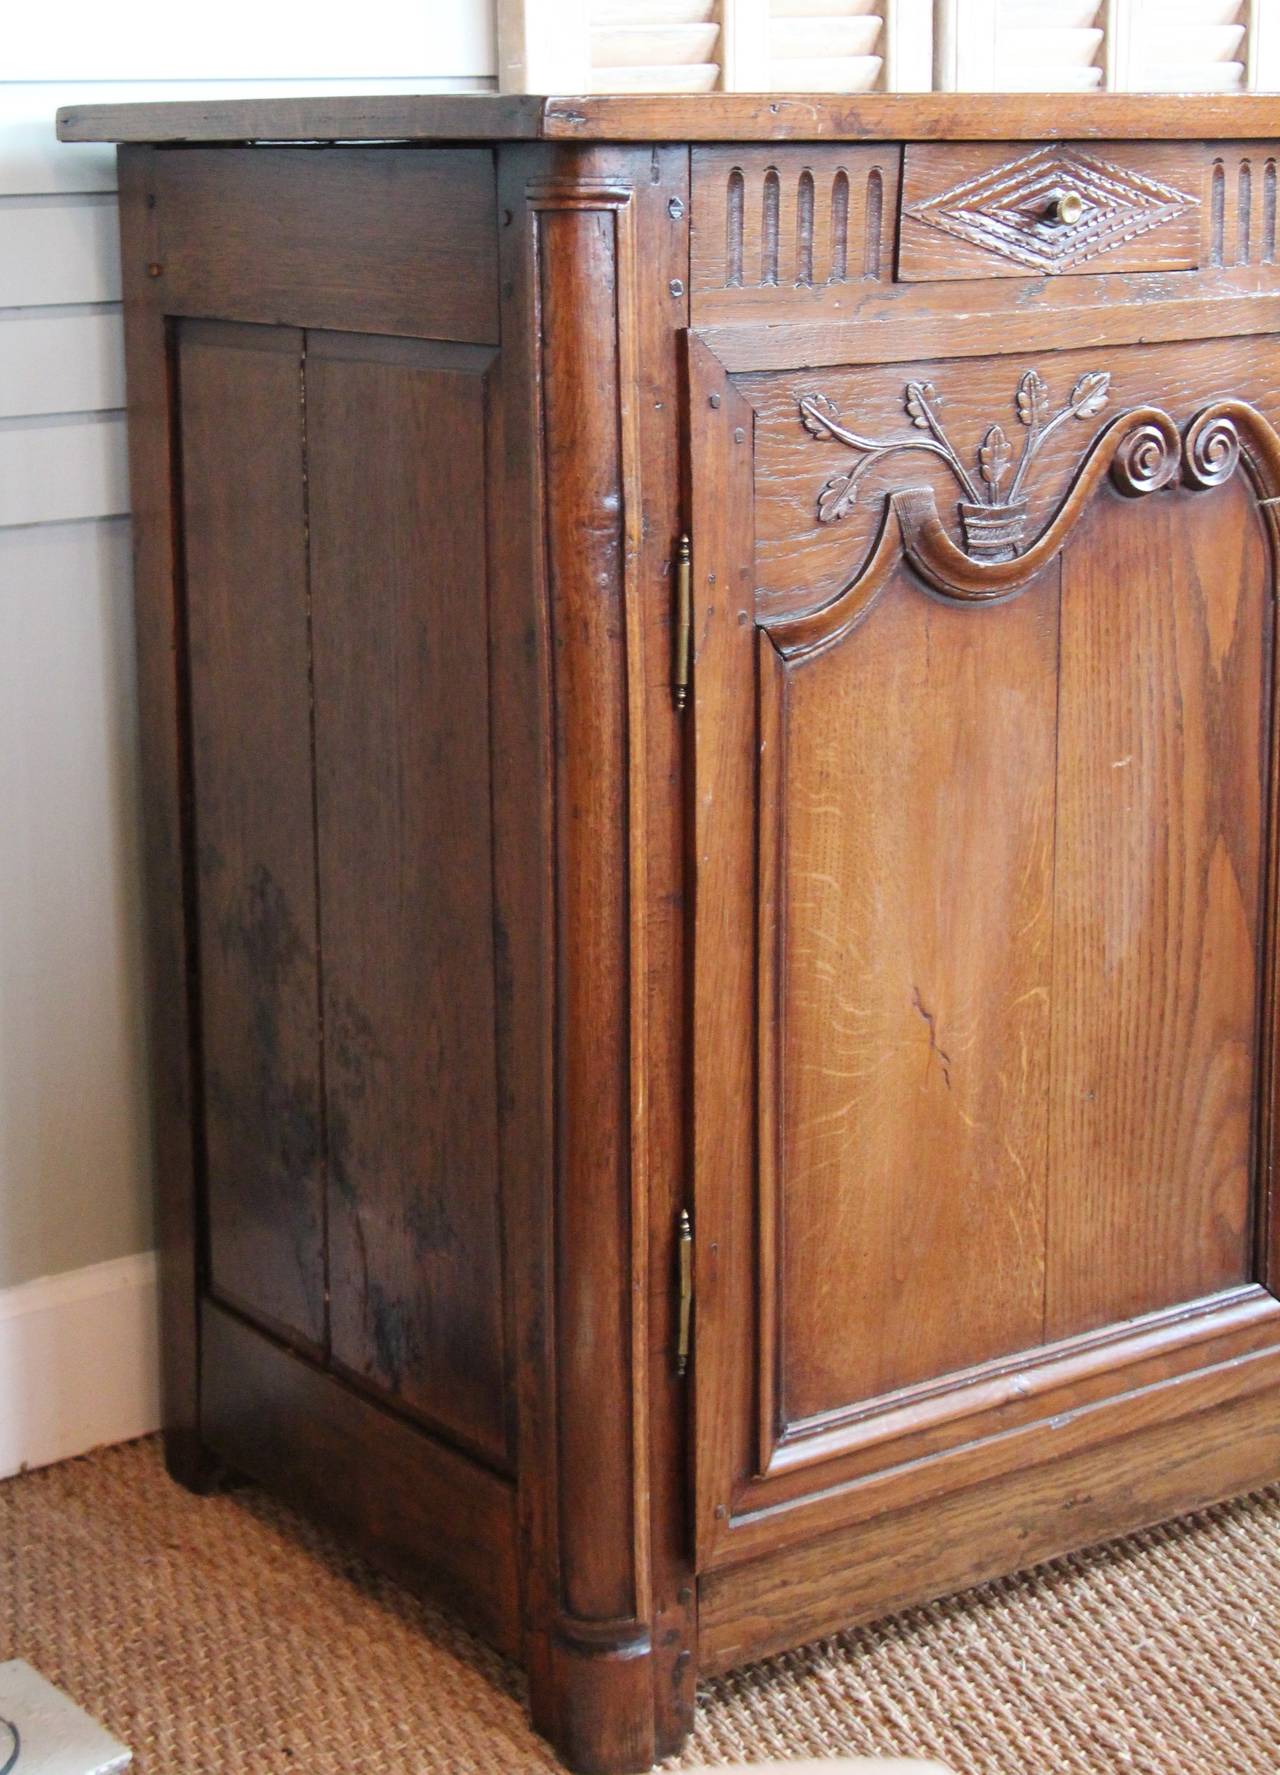 19th century oak enfilade with floral carving and fluted detail. Three drawers on three doors.